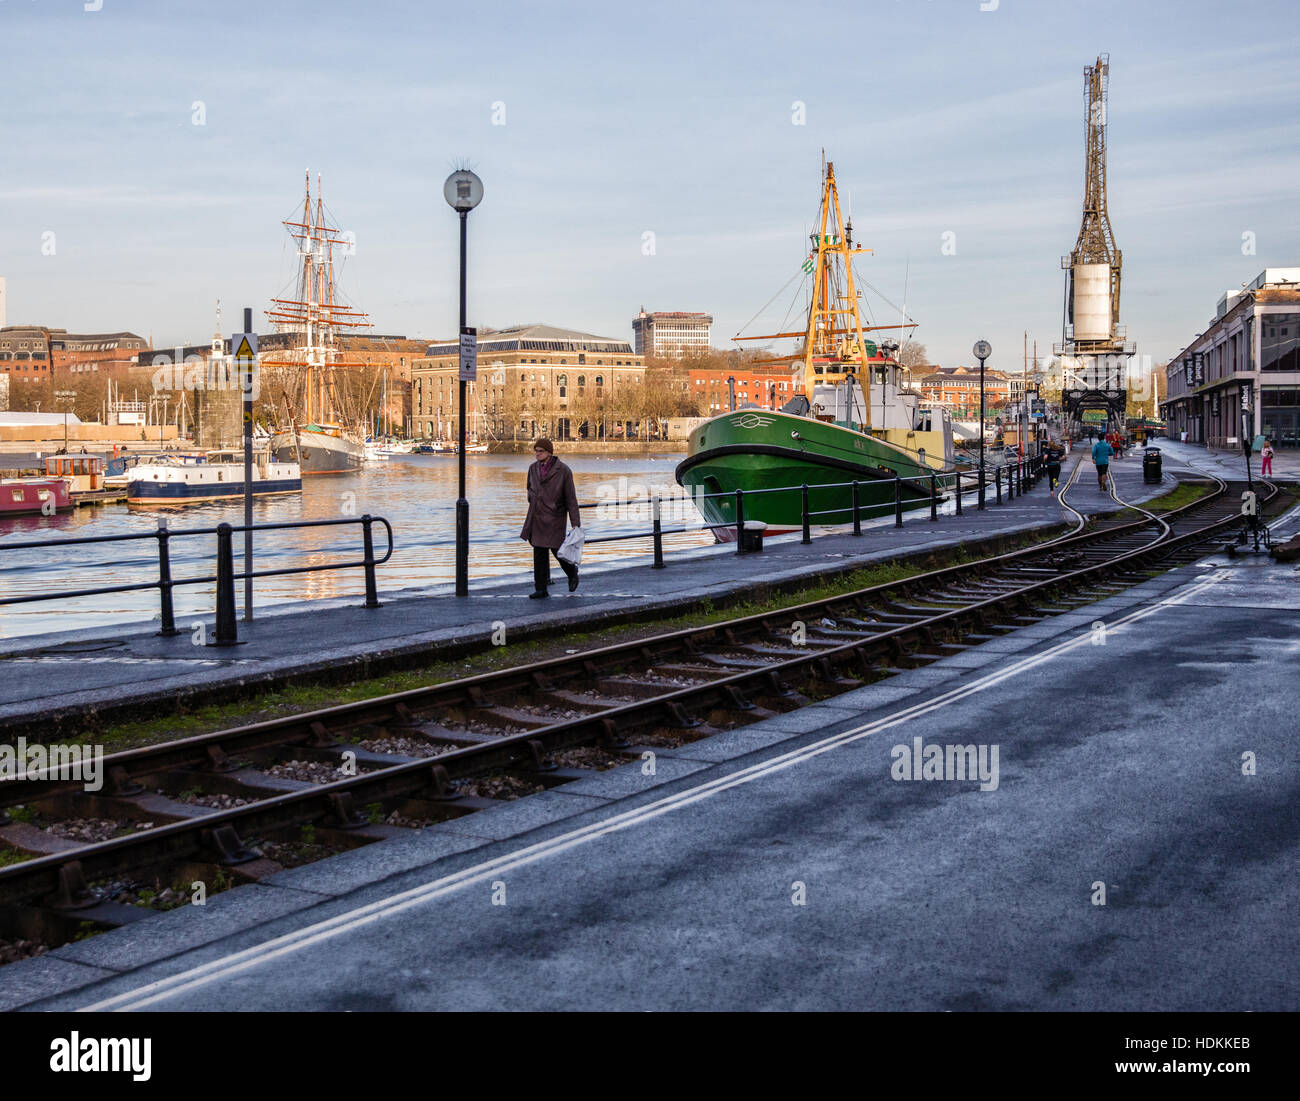 A man walking by Bristol floating harbour on a winter morning alongside the railway the cranes and M shed museum Stock Photo